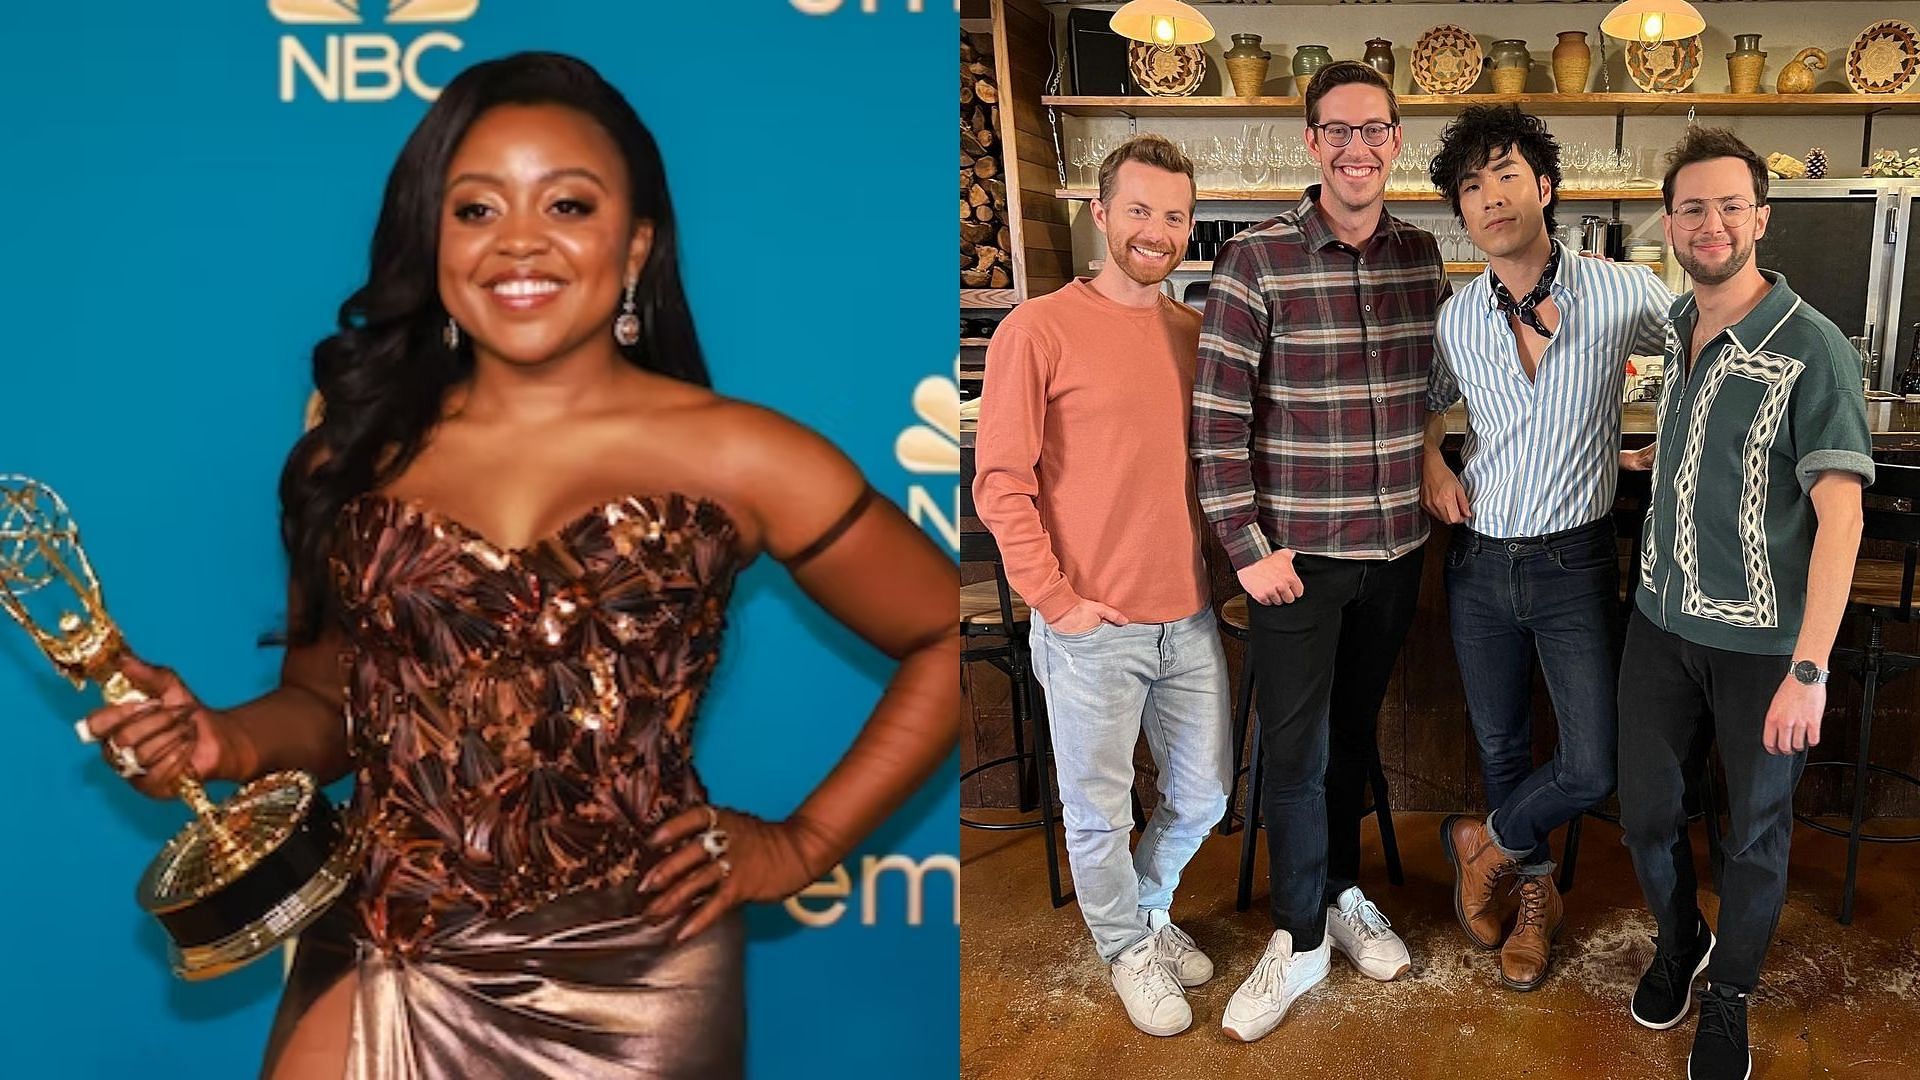 (left) Quinta Brunson and (right) The Try Guys. (Images via Allen J. Schaben/Getty Images and Instagram/@tryguys)